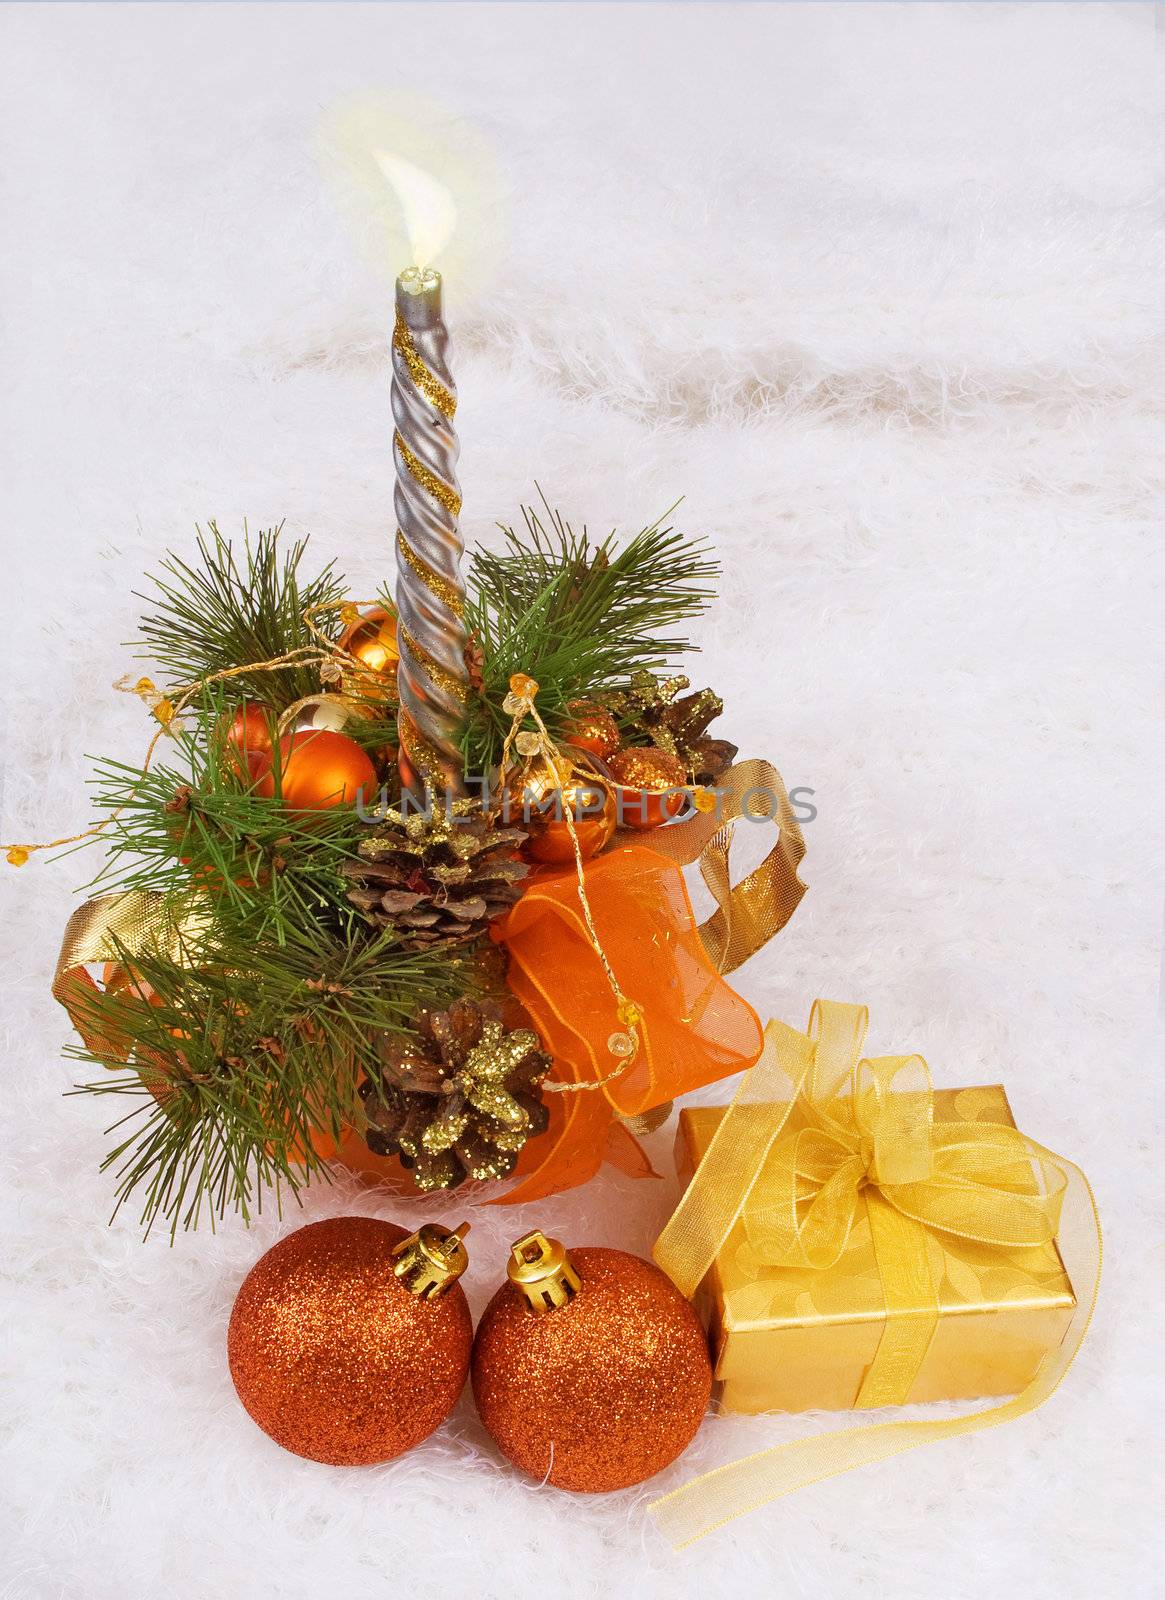 Christmas silver candles and golden box and spheres on white fur by BIG_TAU